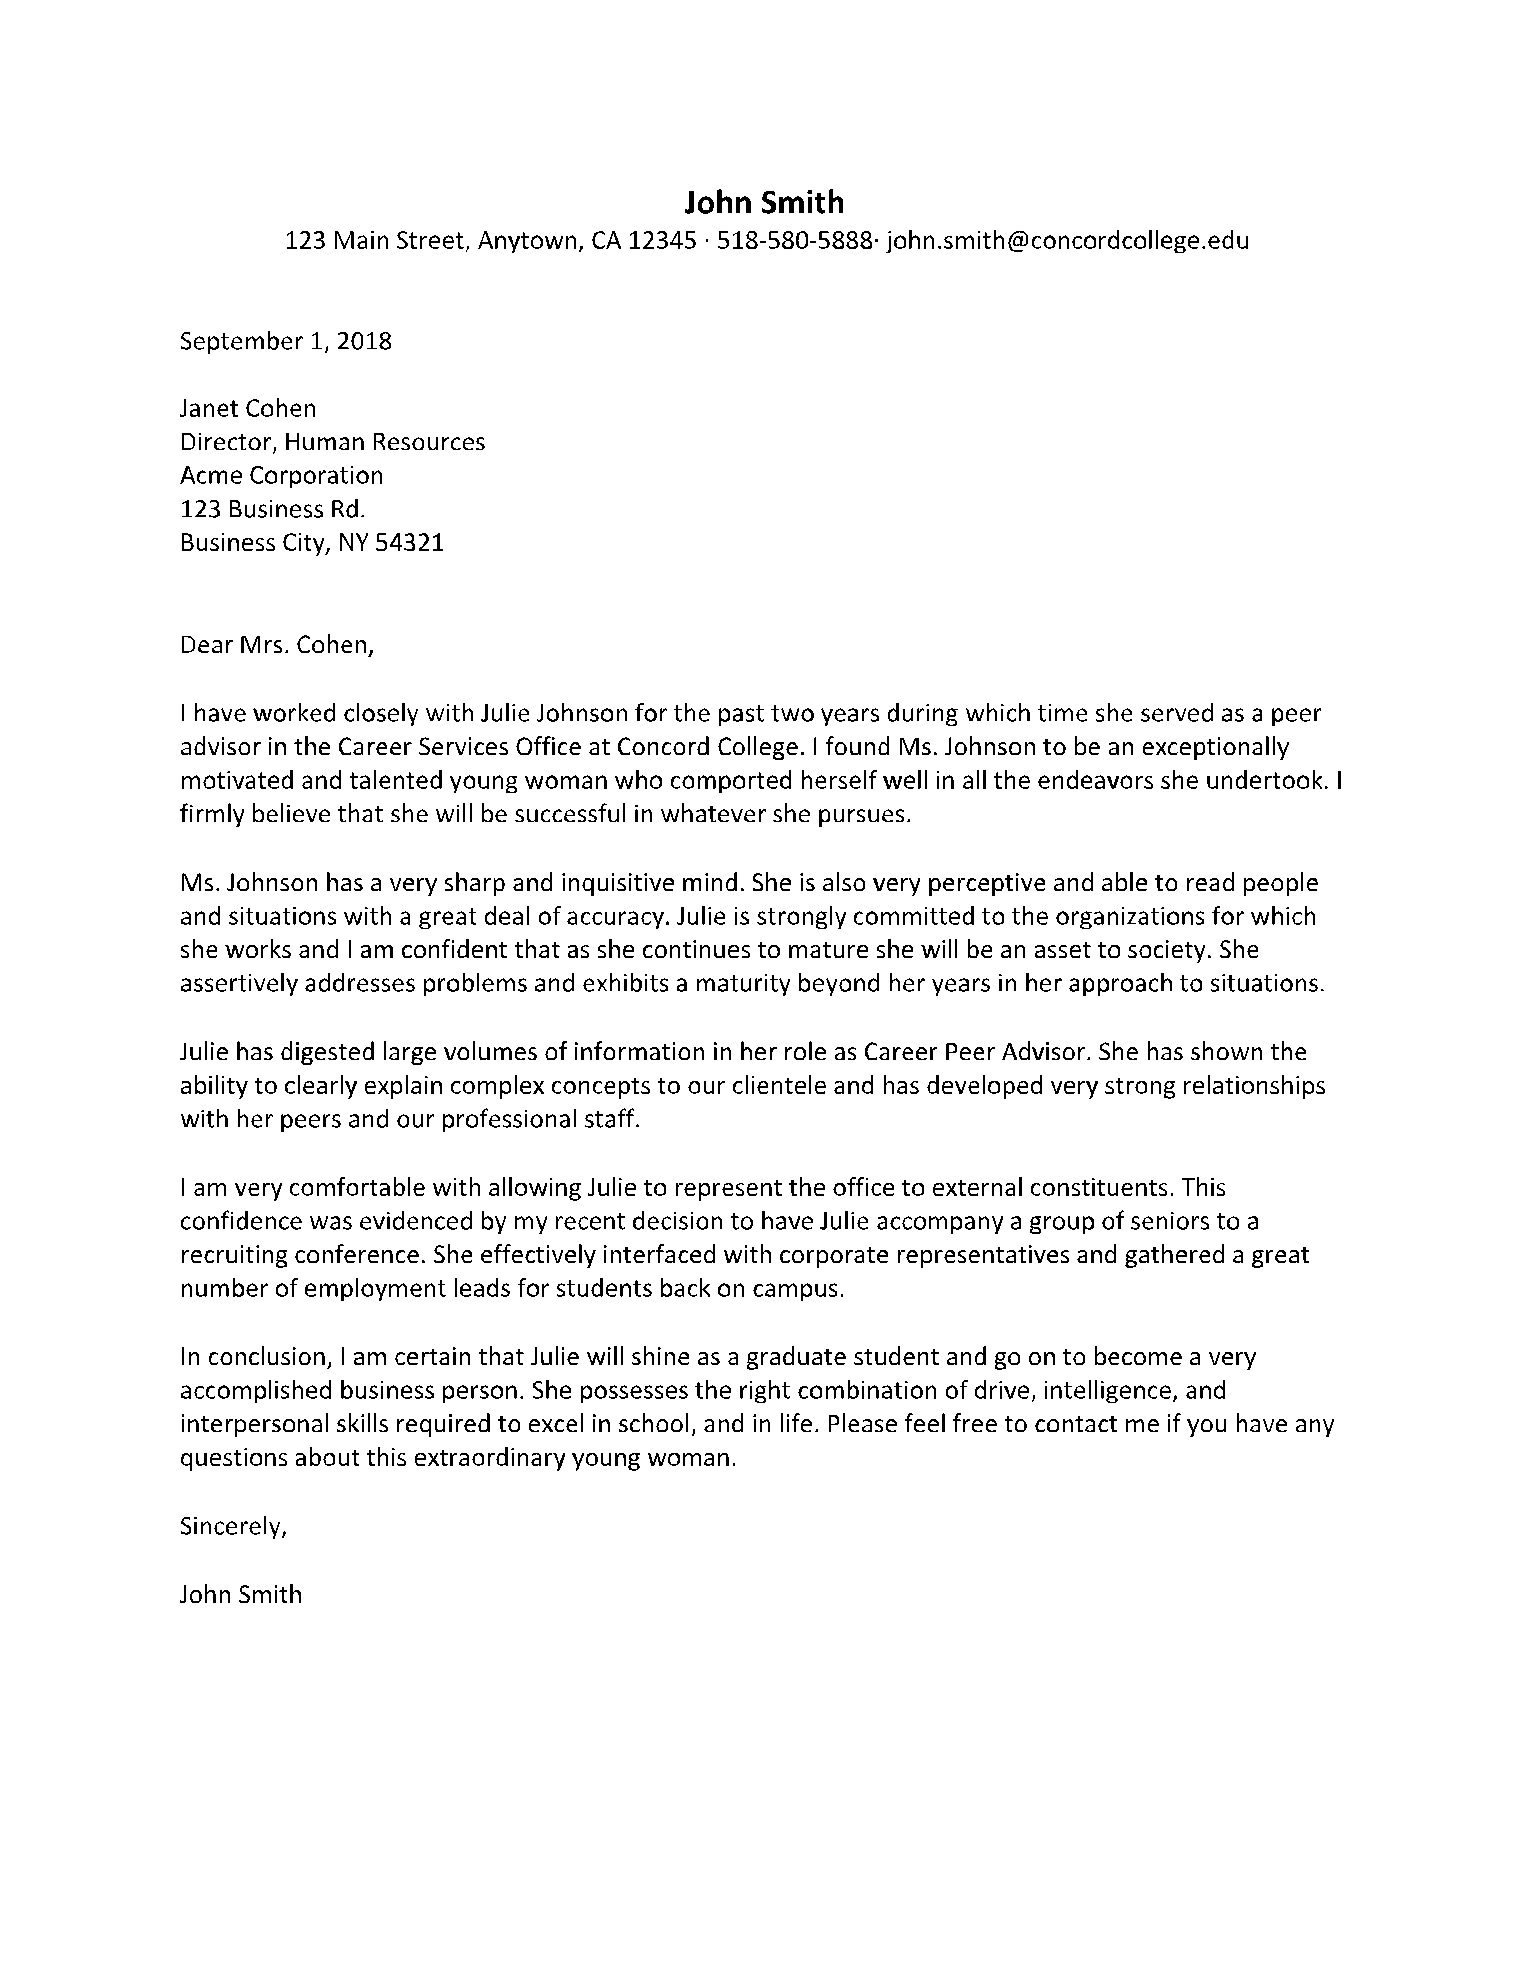 The Letter Of Recommendation Sample